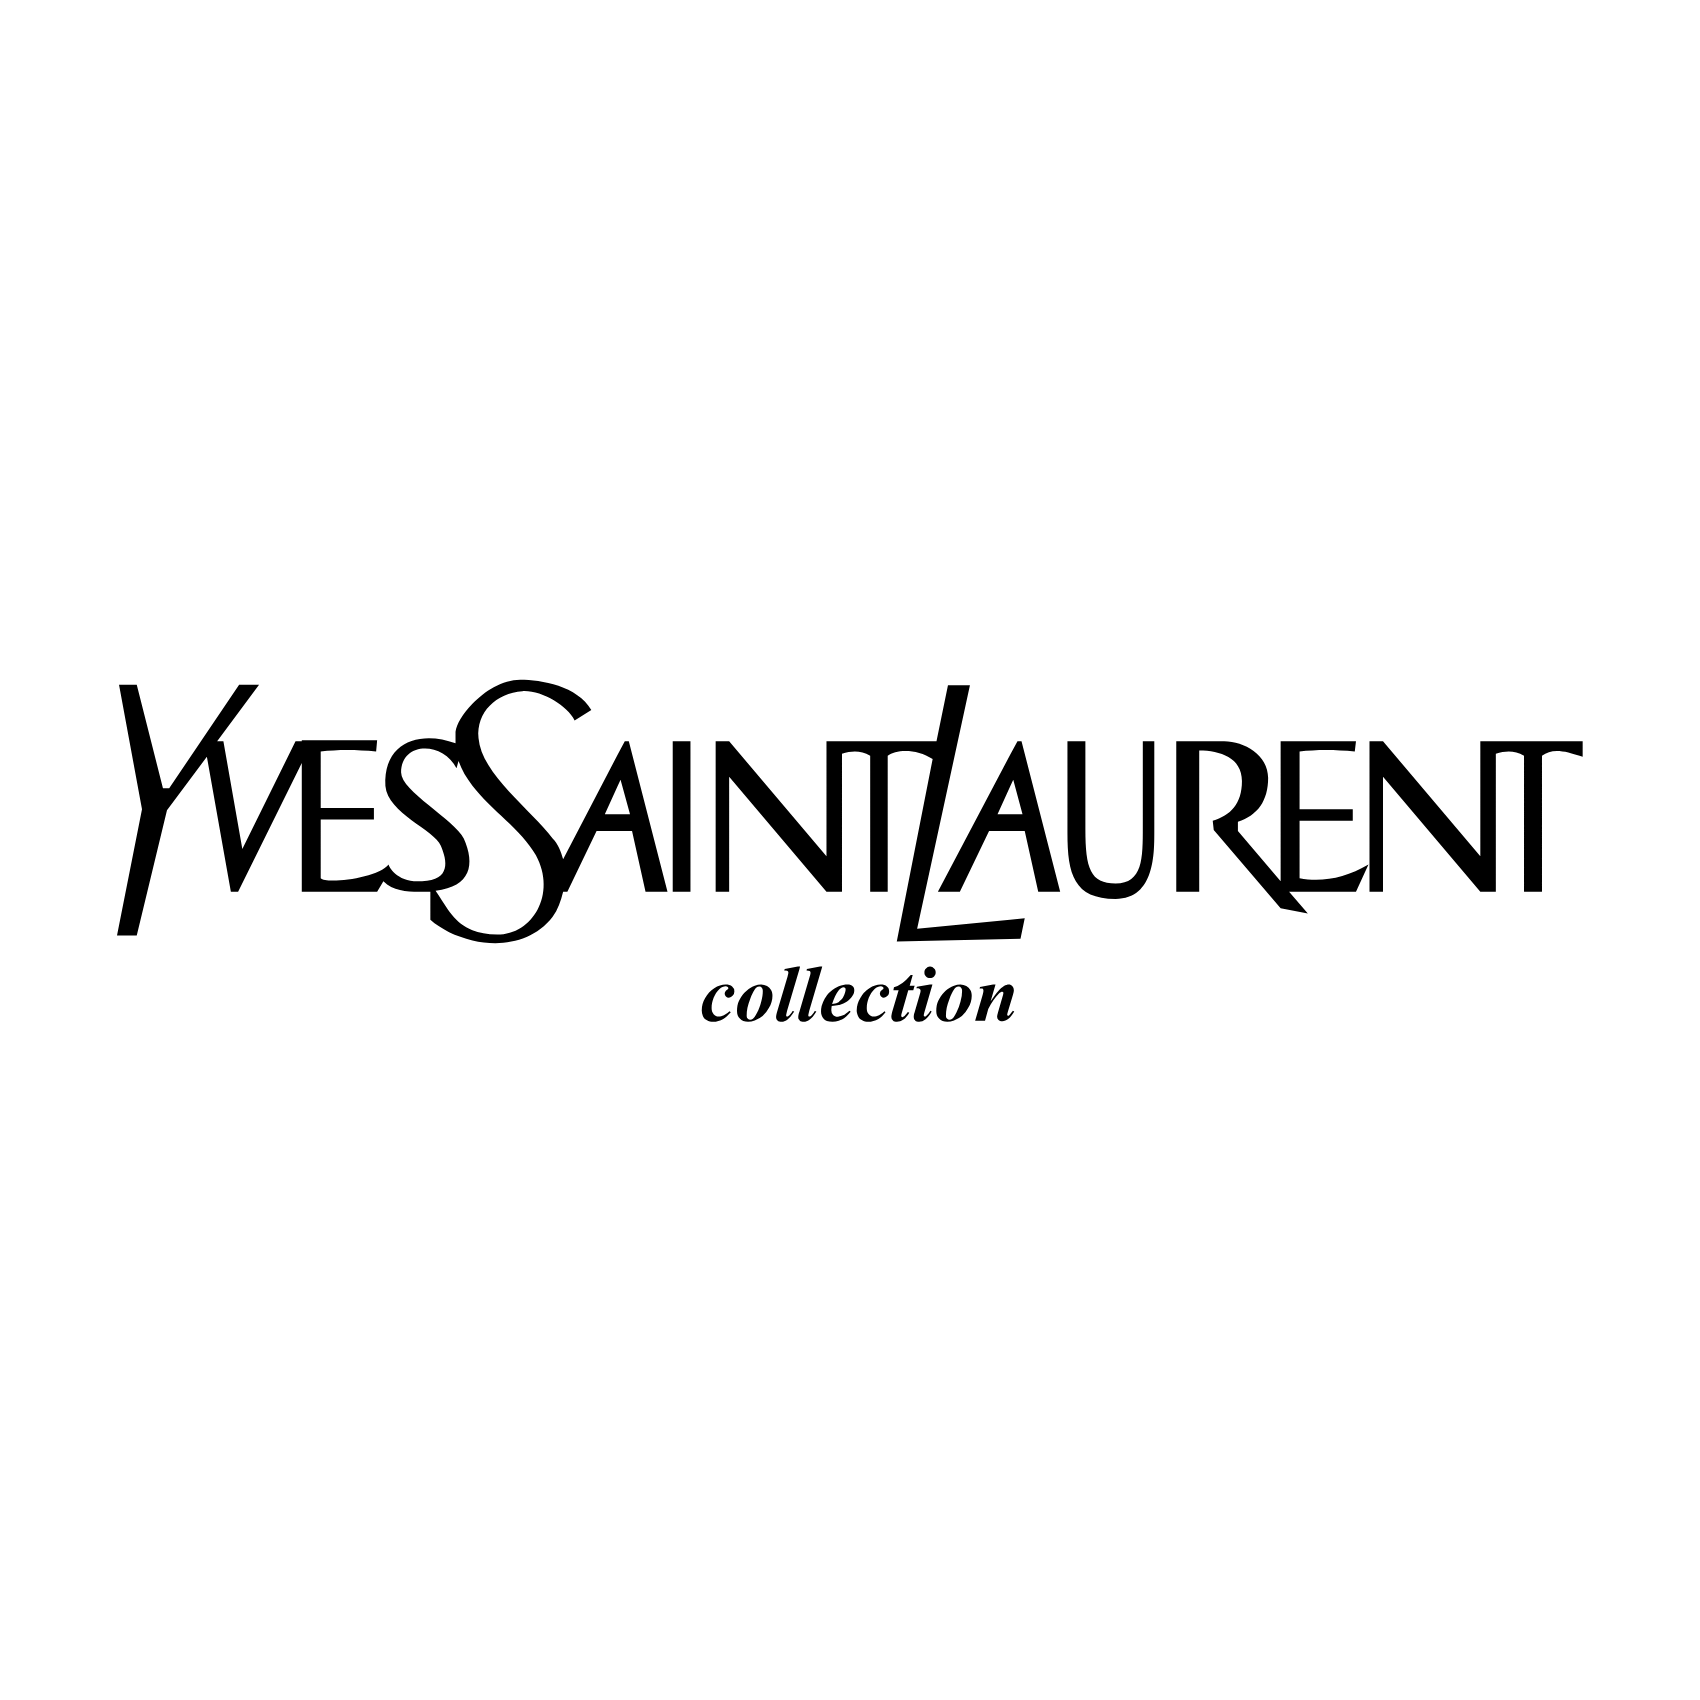 Download Yves saint laurent collection Logo PNG and Vector (PDF, SVG ...